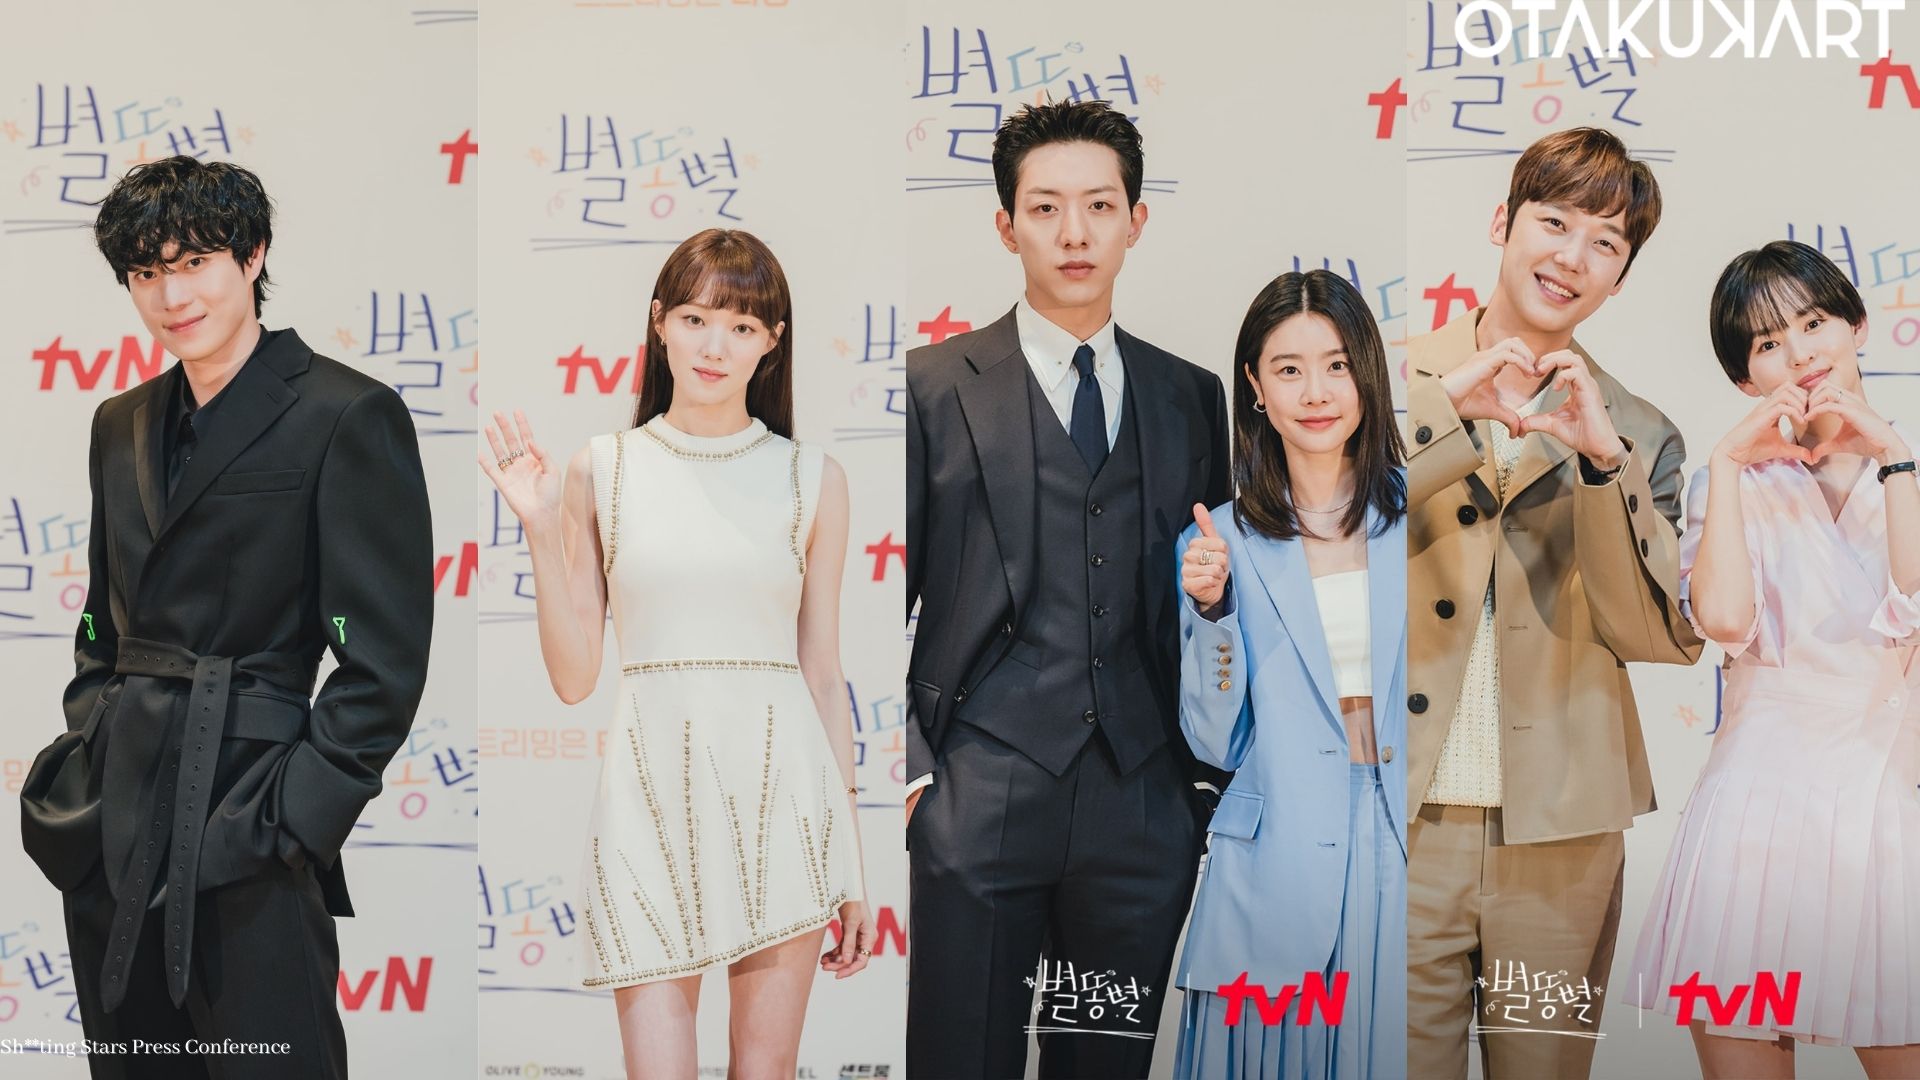 Shooting Stars Press Conference: Cast Members Talks About Various Aspects of the Drama Series